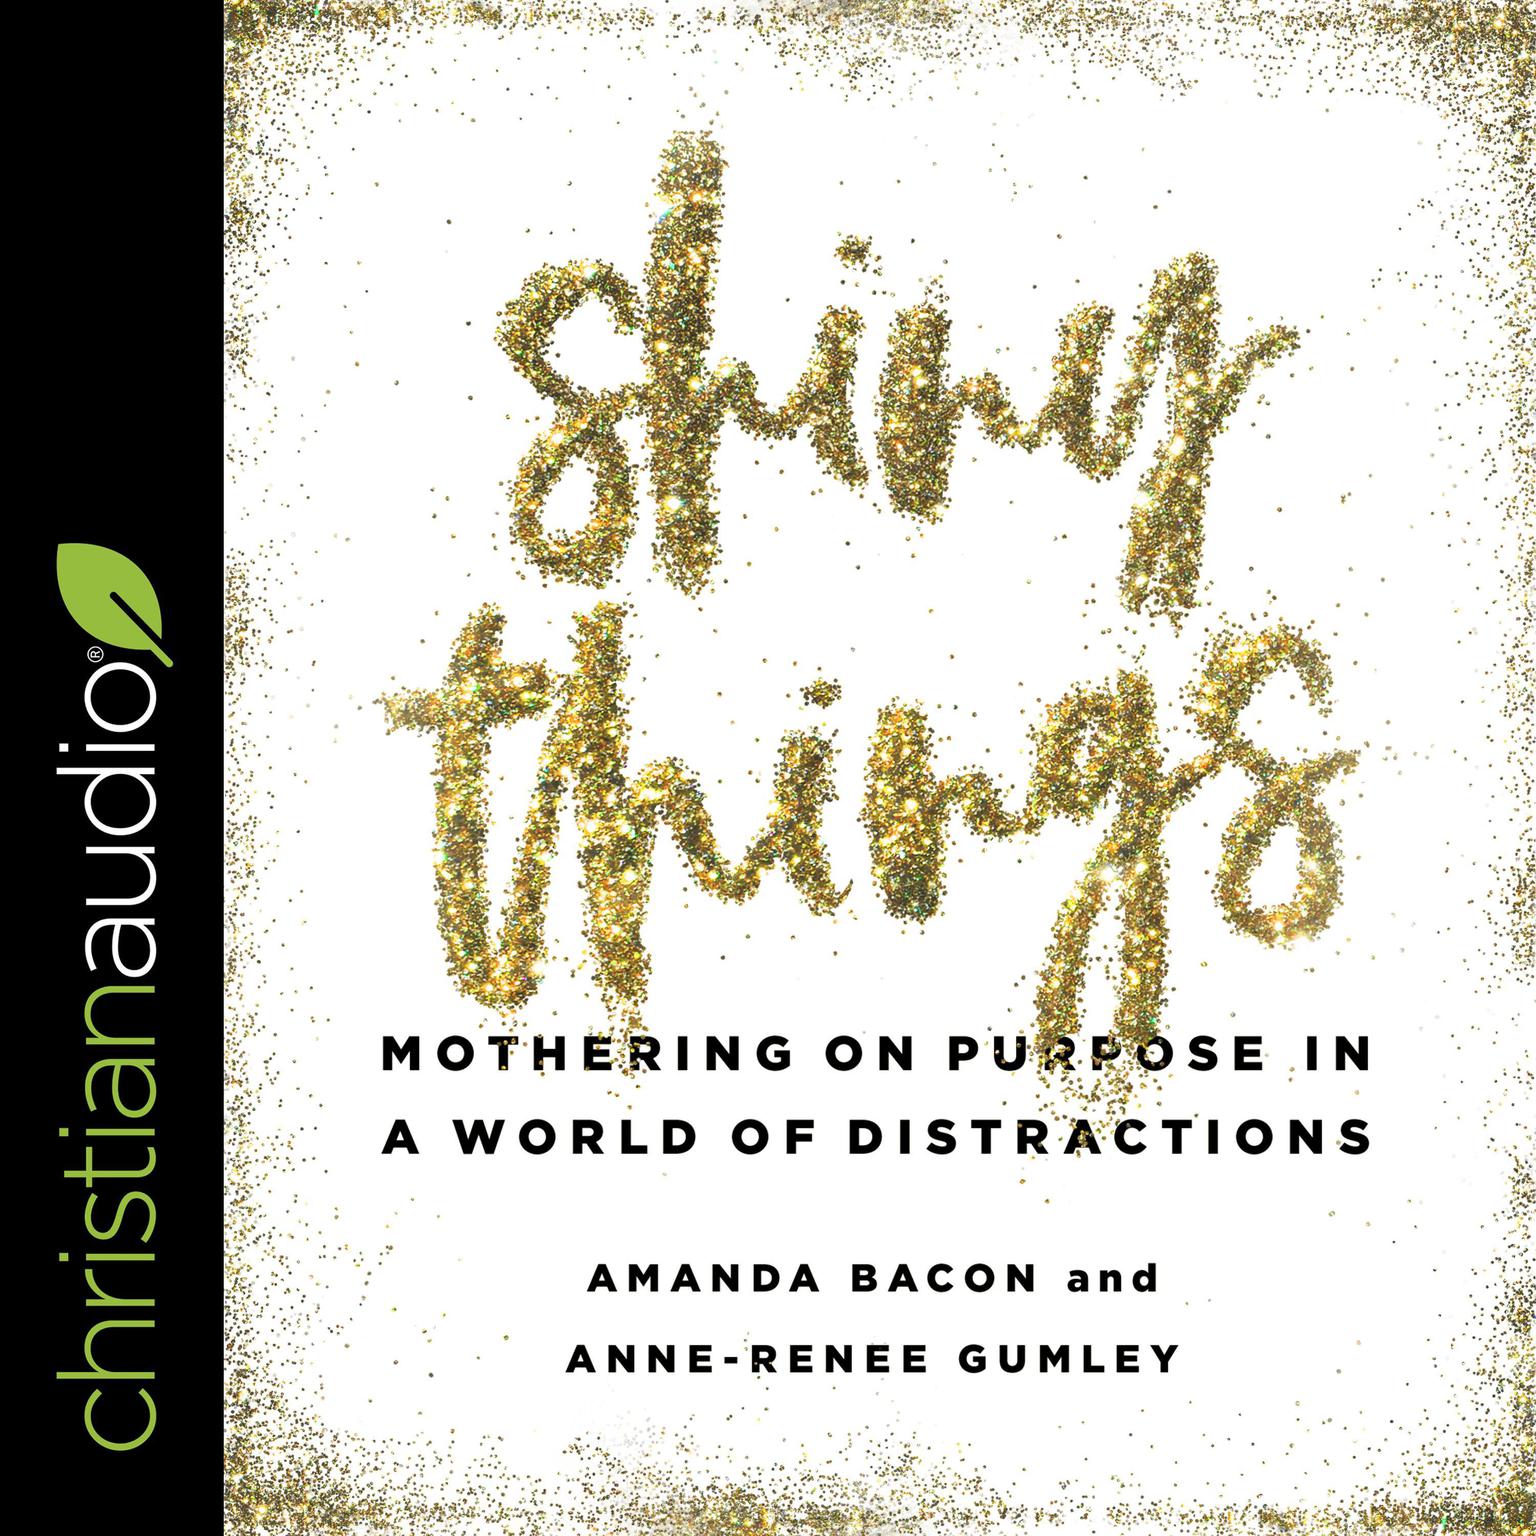 Shiny Things: Mothering on Purpose in a World of Distractions Audiobook, by Amanda Bacon